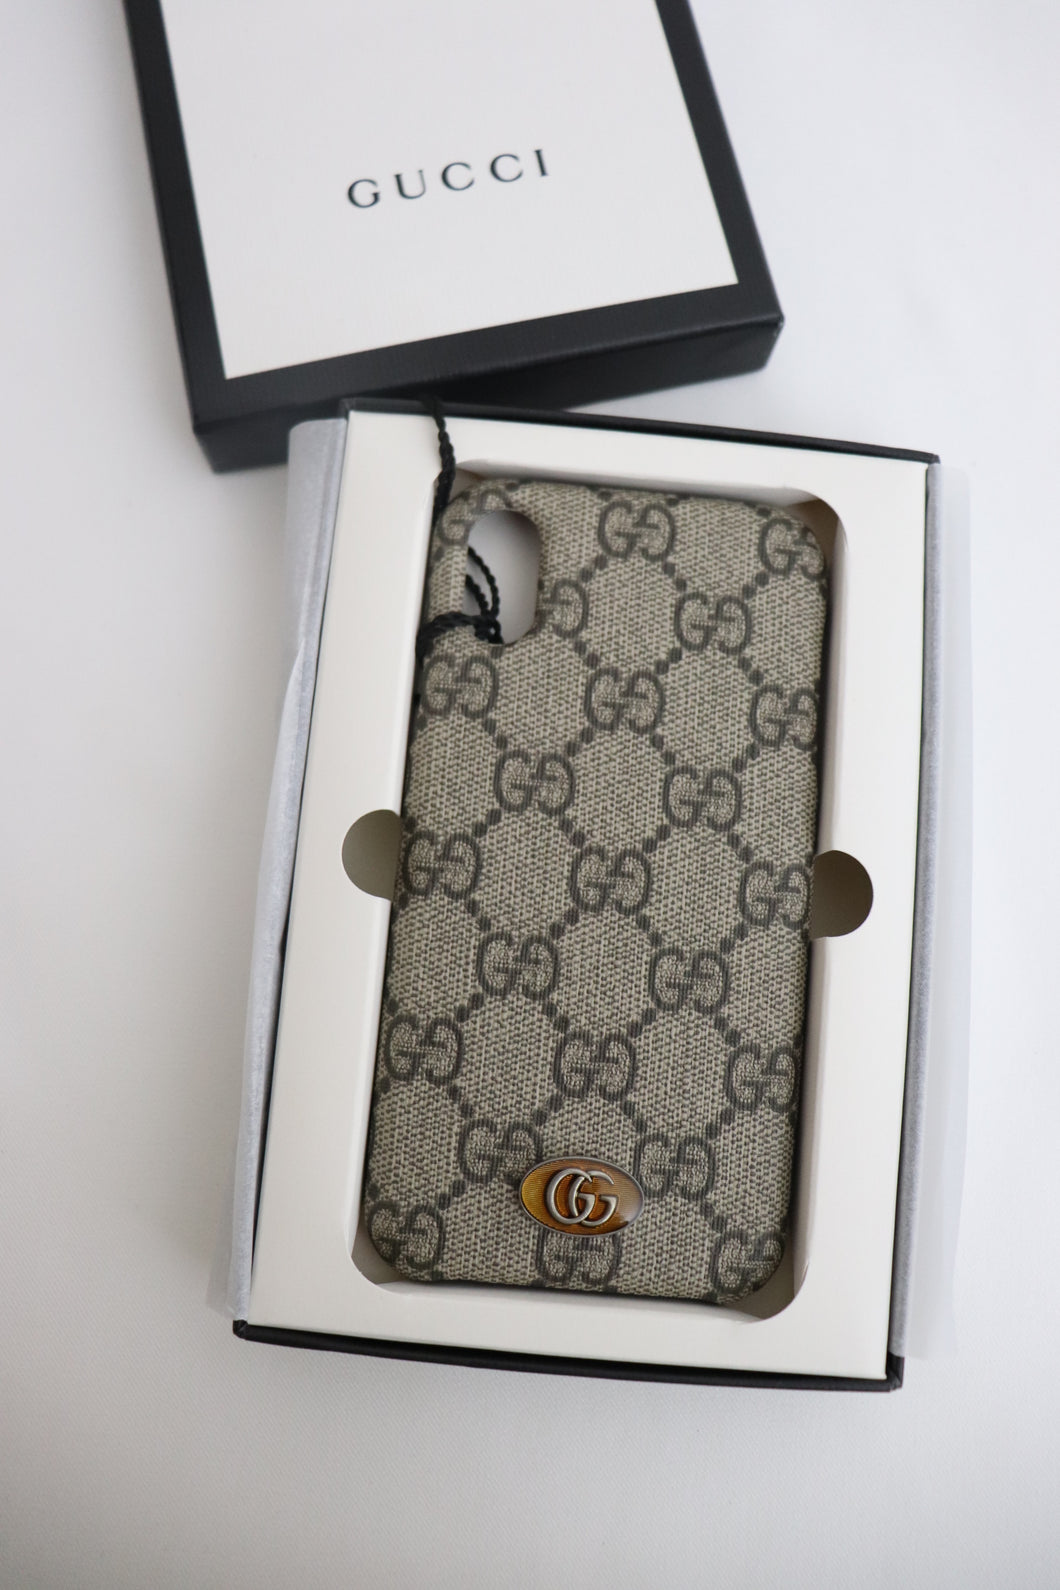 Gucci Ophidia X/XS iphone case